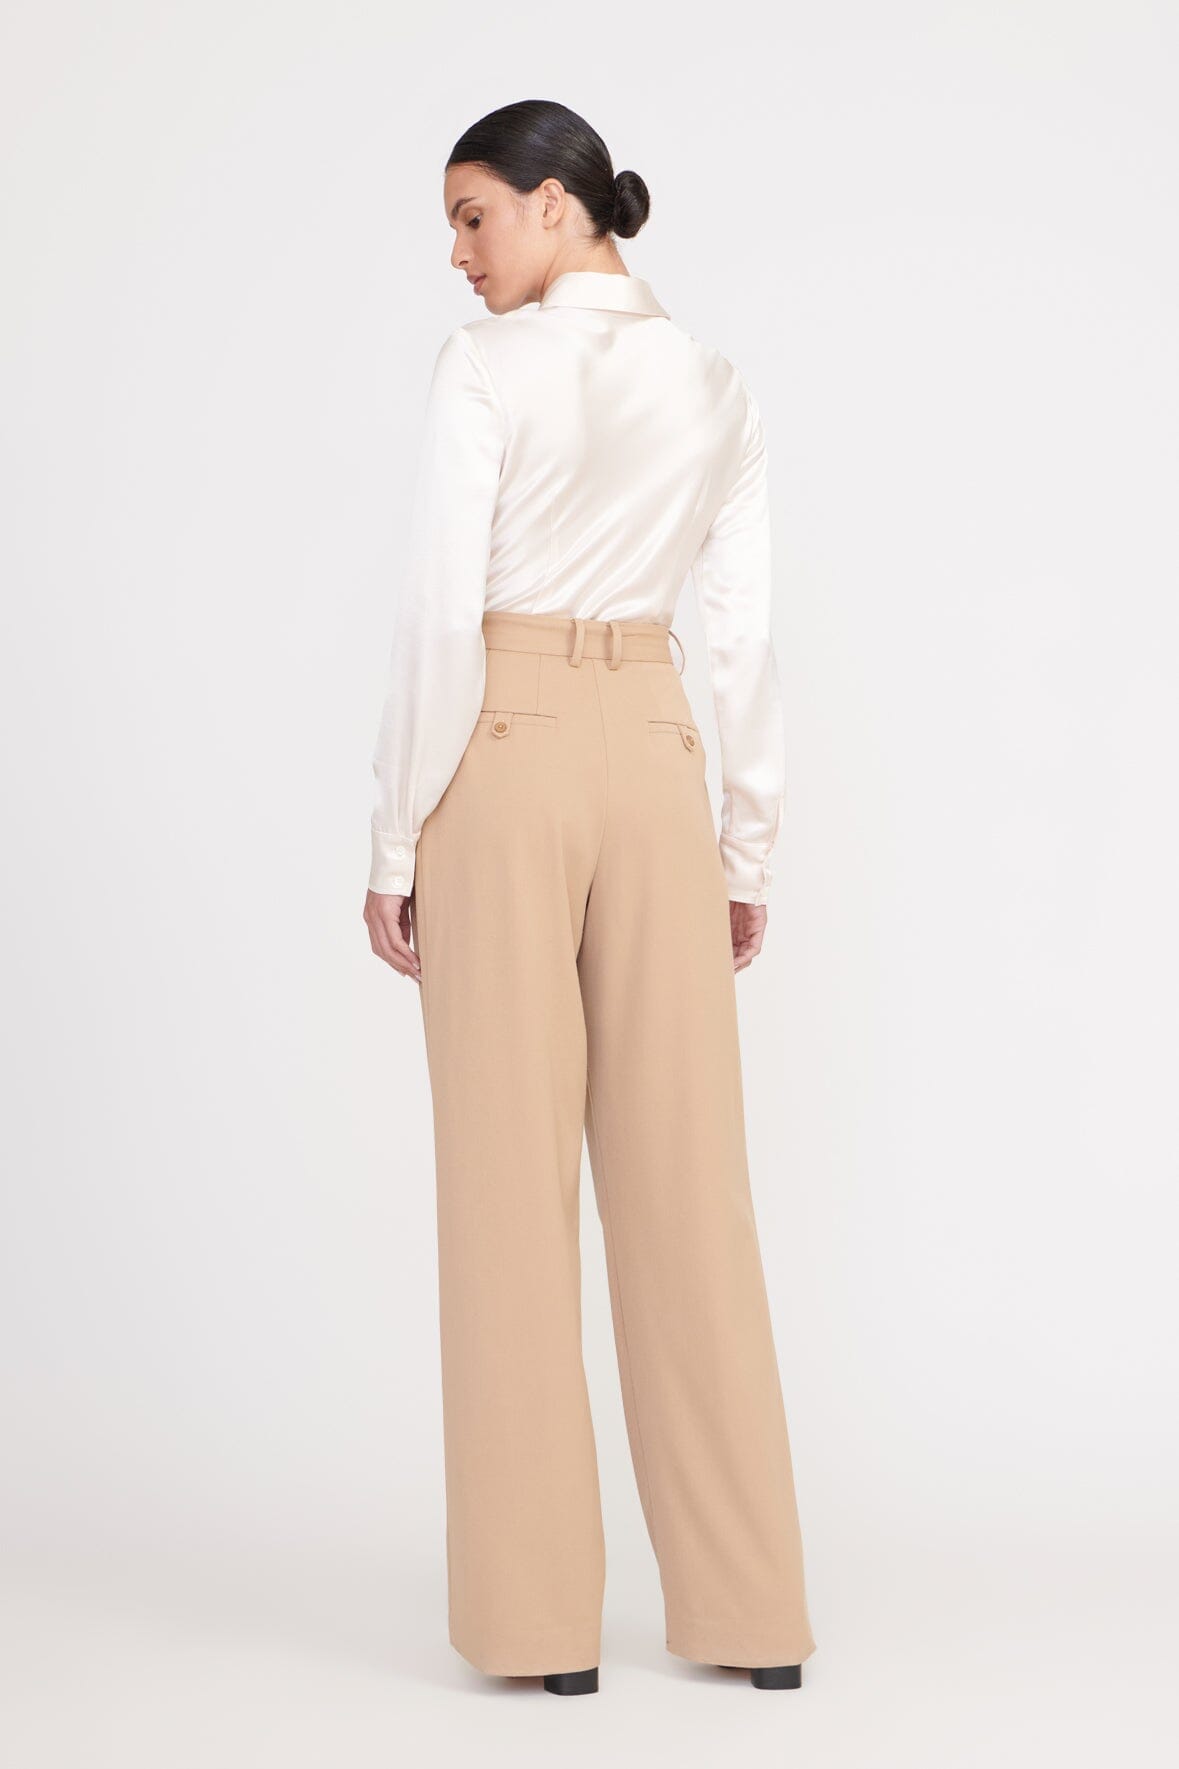 palazzo Relaxed Women Black, White Trousers - Buy palazzo Relaxed Women  Black, White Trousers Online at Best Prices in India | Flipkart.com